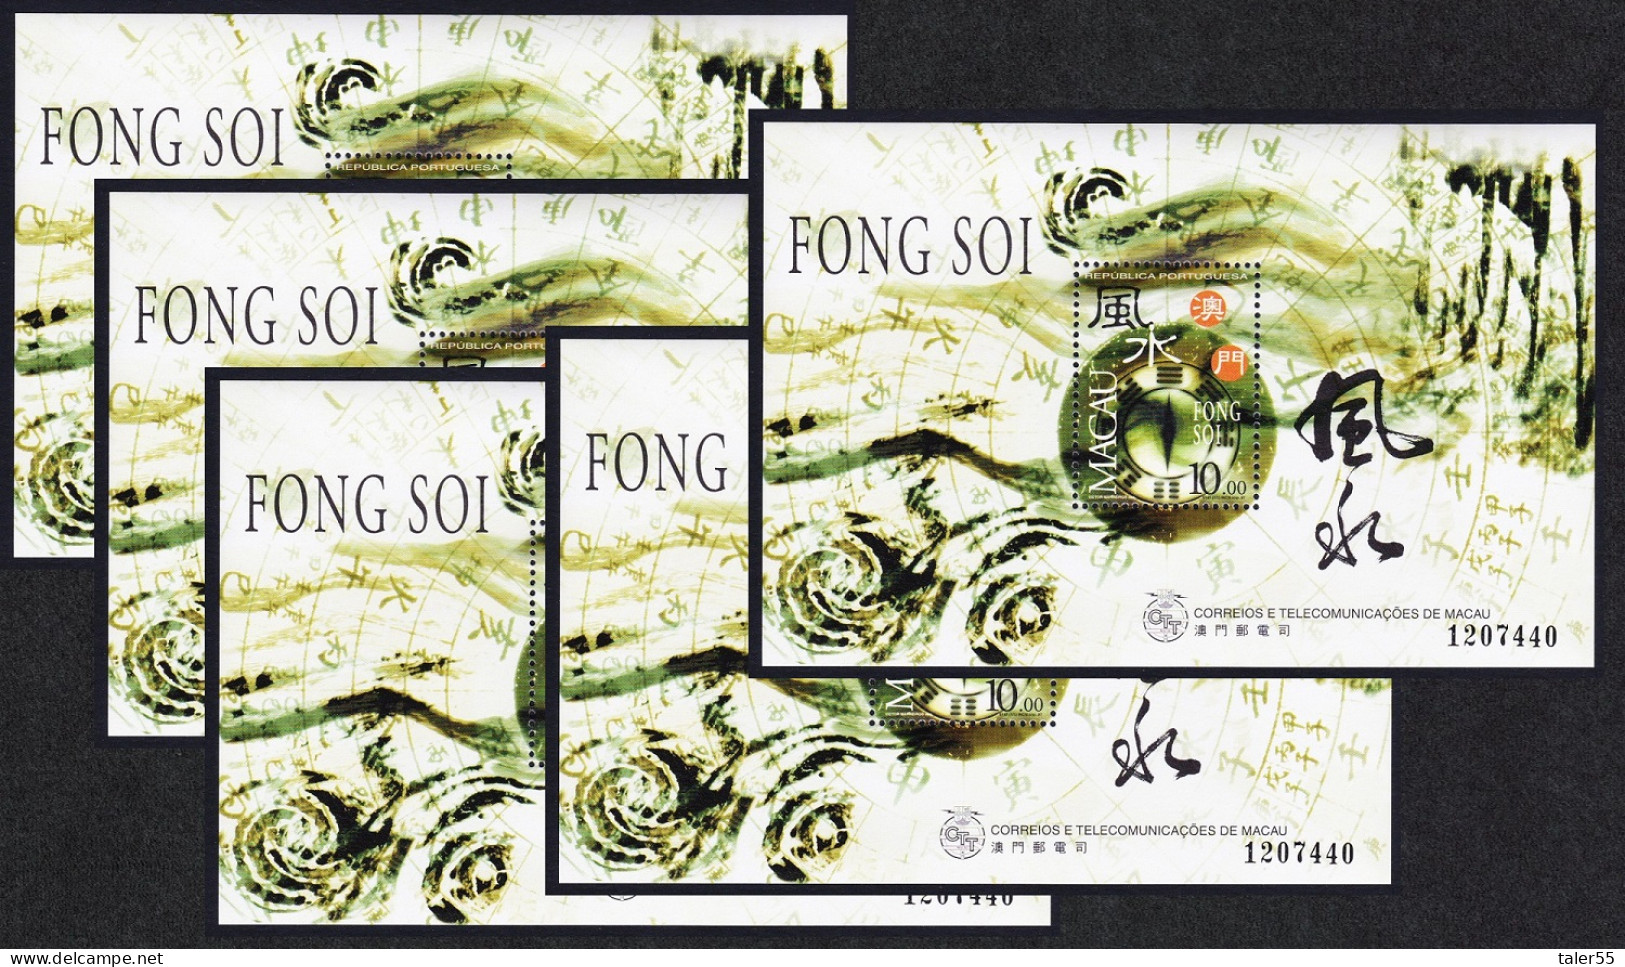 Macao Macau Feng Shui 5 MSs 1997 MNH SG#MS1017 - Unused Stamps